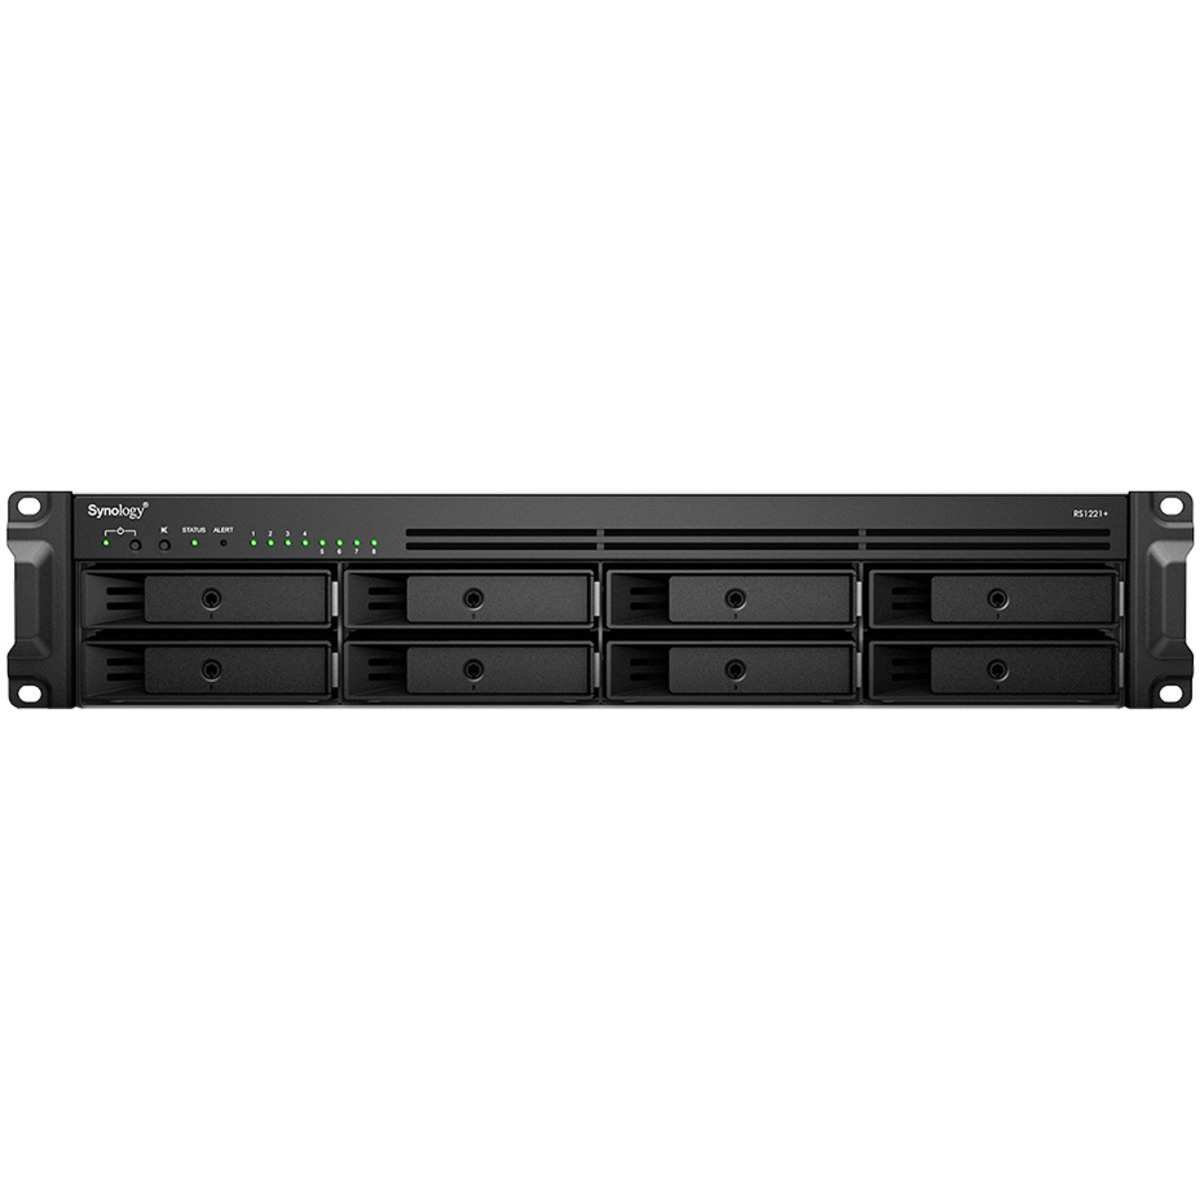 buy $4065 Synology RackStation RS1221RP+ 64tb RackMount NAS - Network Attached Storage Device 8x8000gb Western Digital Ultrastar DC HC320 HUS728T8TALE6L4 3.5 7200rpm SATA 6Gb/s HDD ENTERPRISE Class Drives Installed - Burn-In Tested - nas headquarters buy network attached storage server device das new raid-5 free shipping usa christmas new year holiday sale RackStation RS1221RP+